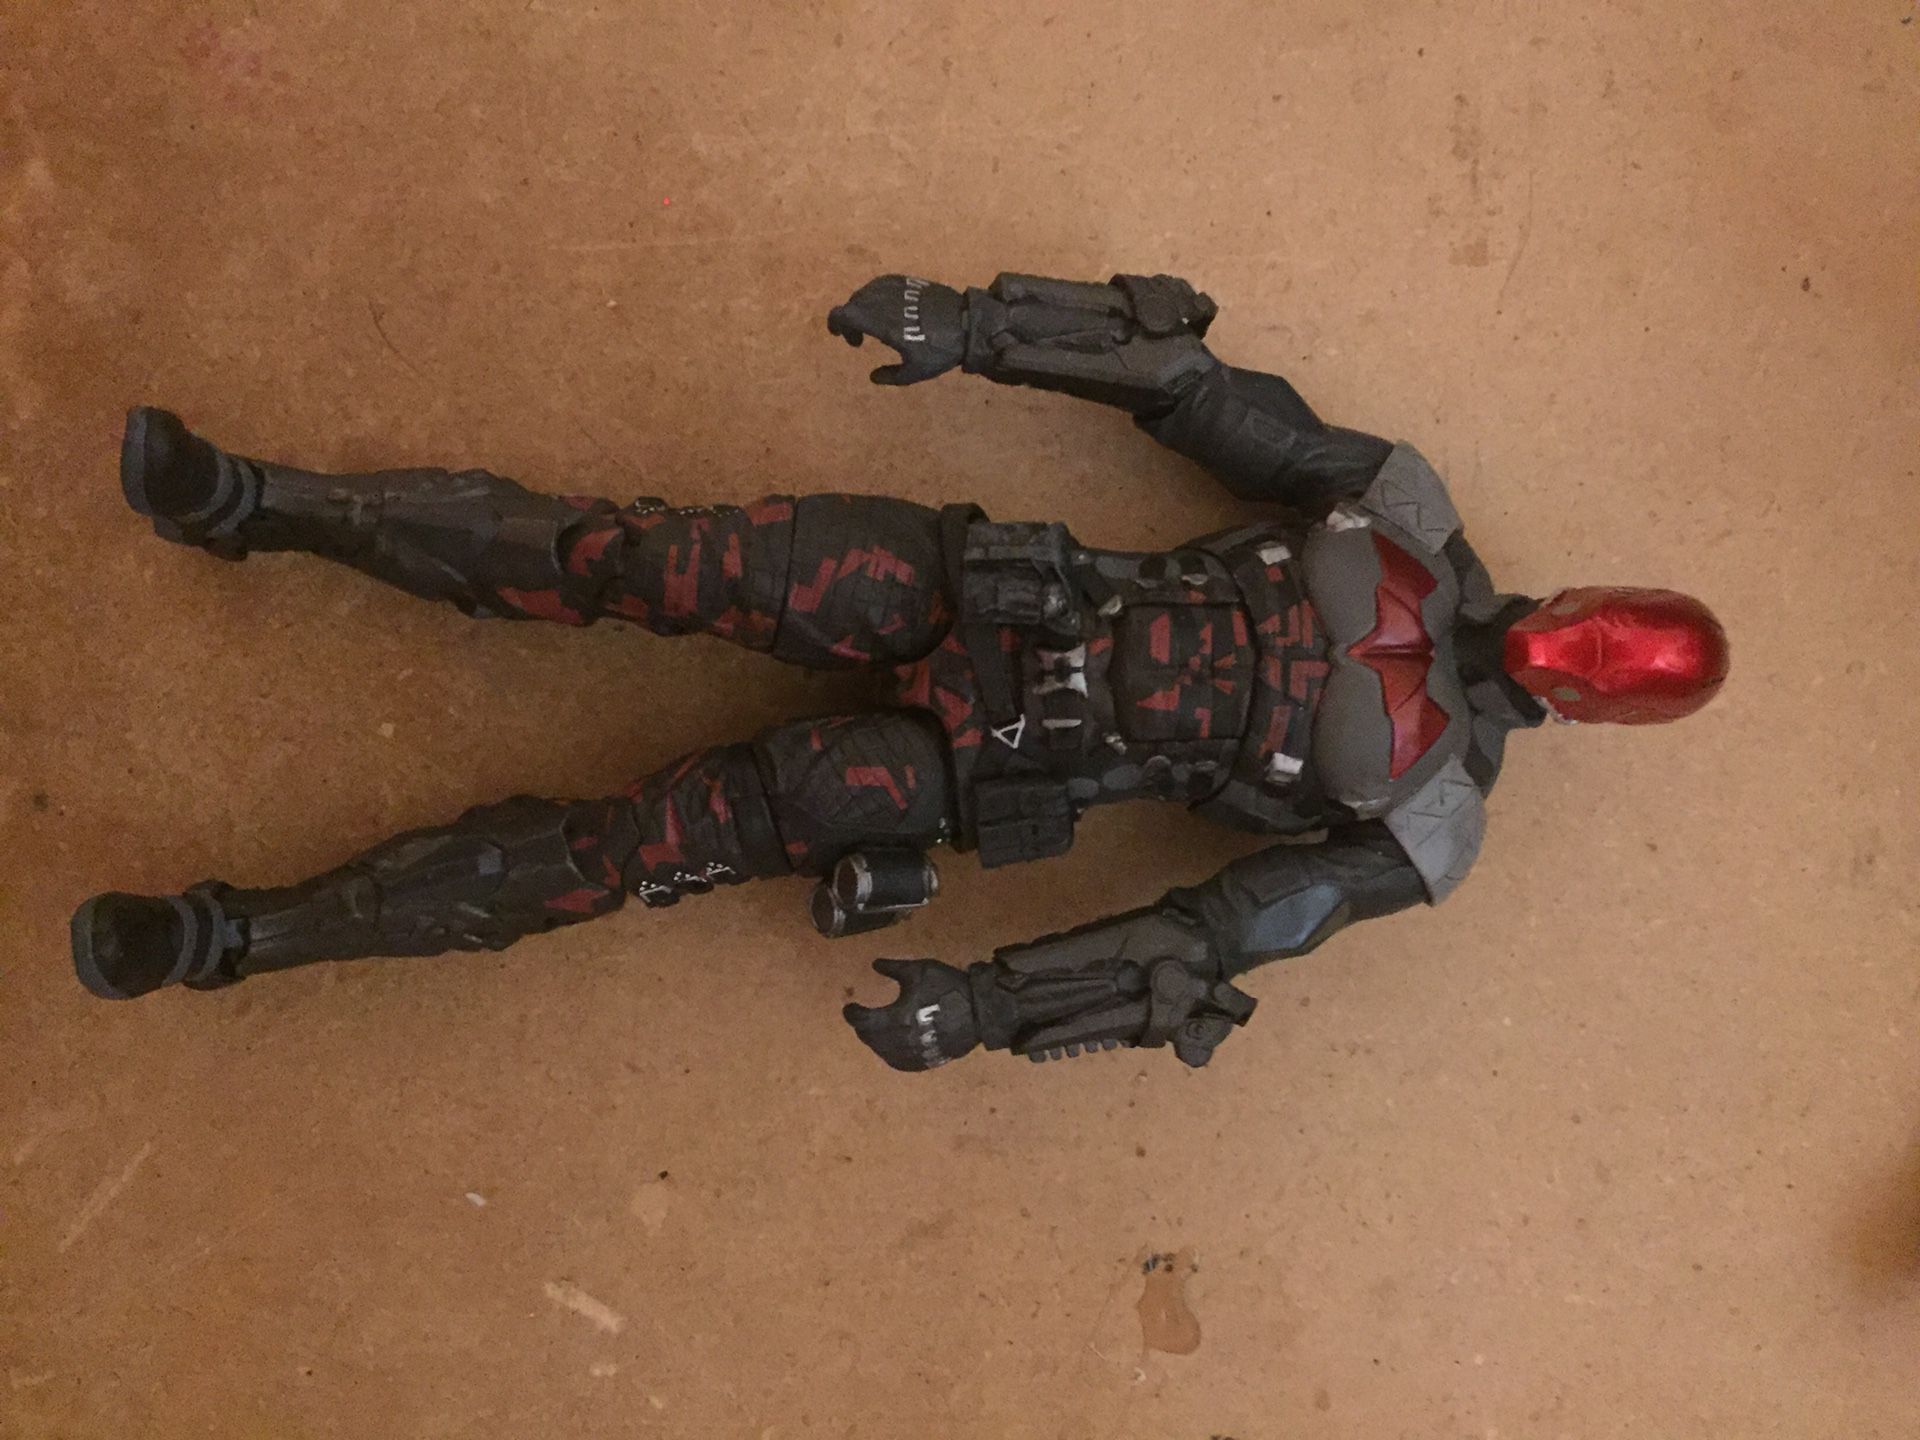 DC Collectibles Batman Arkham Knight Red Hood Action Figure